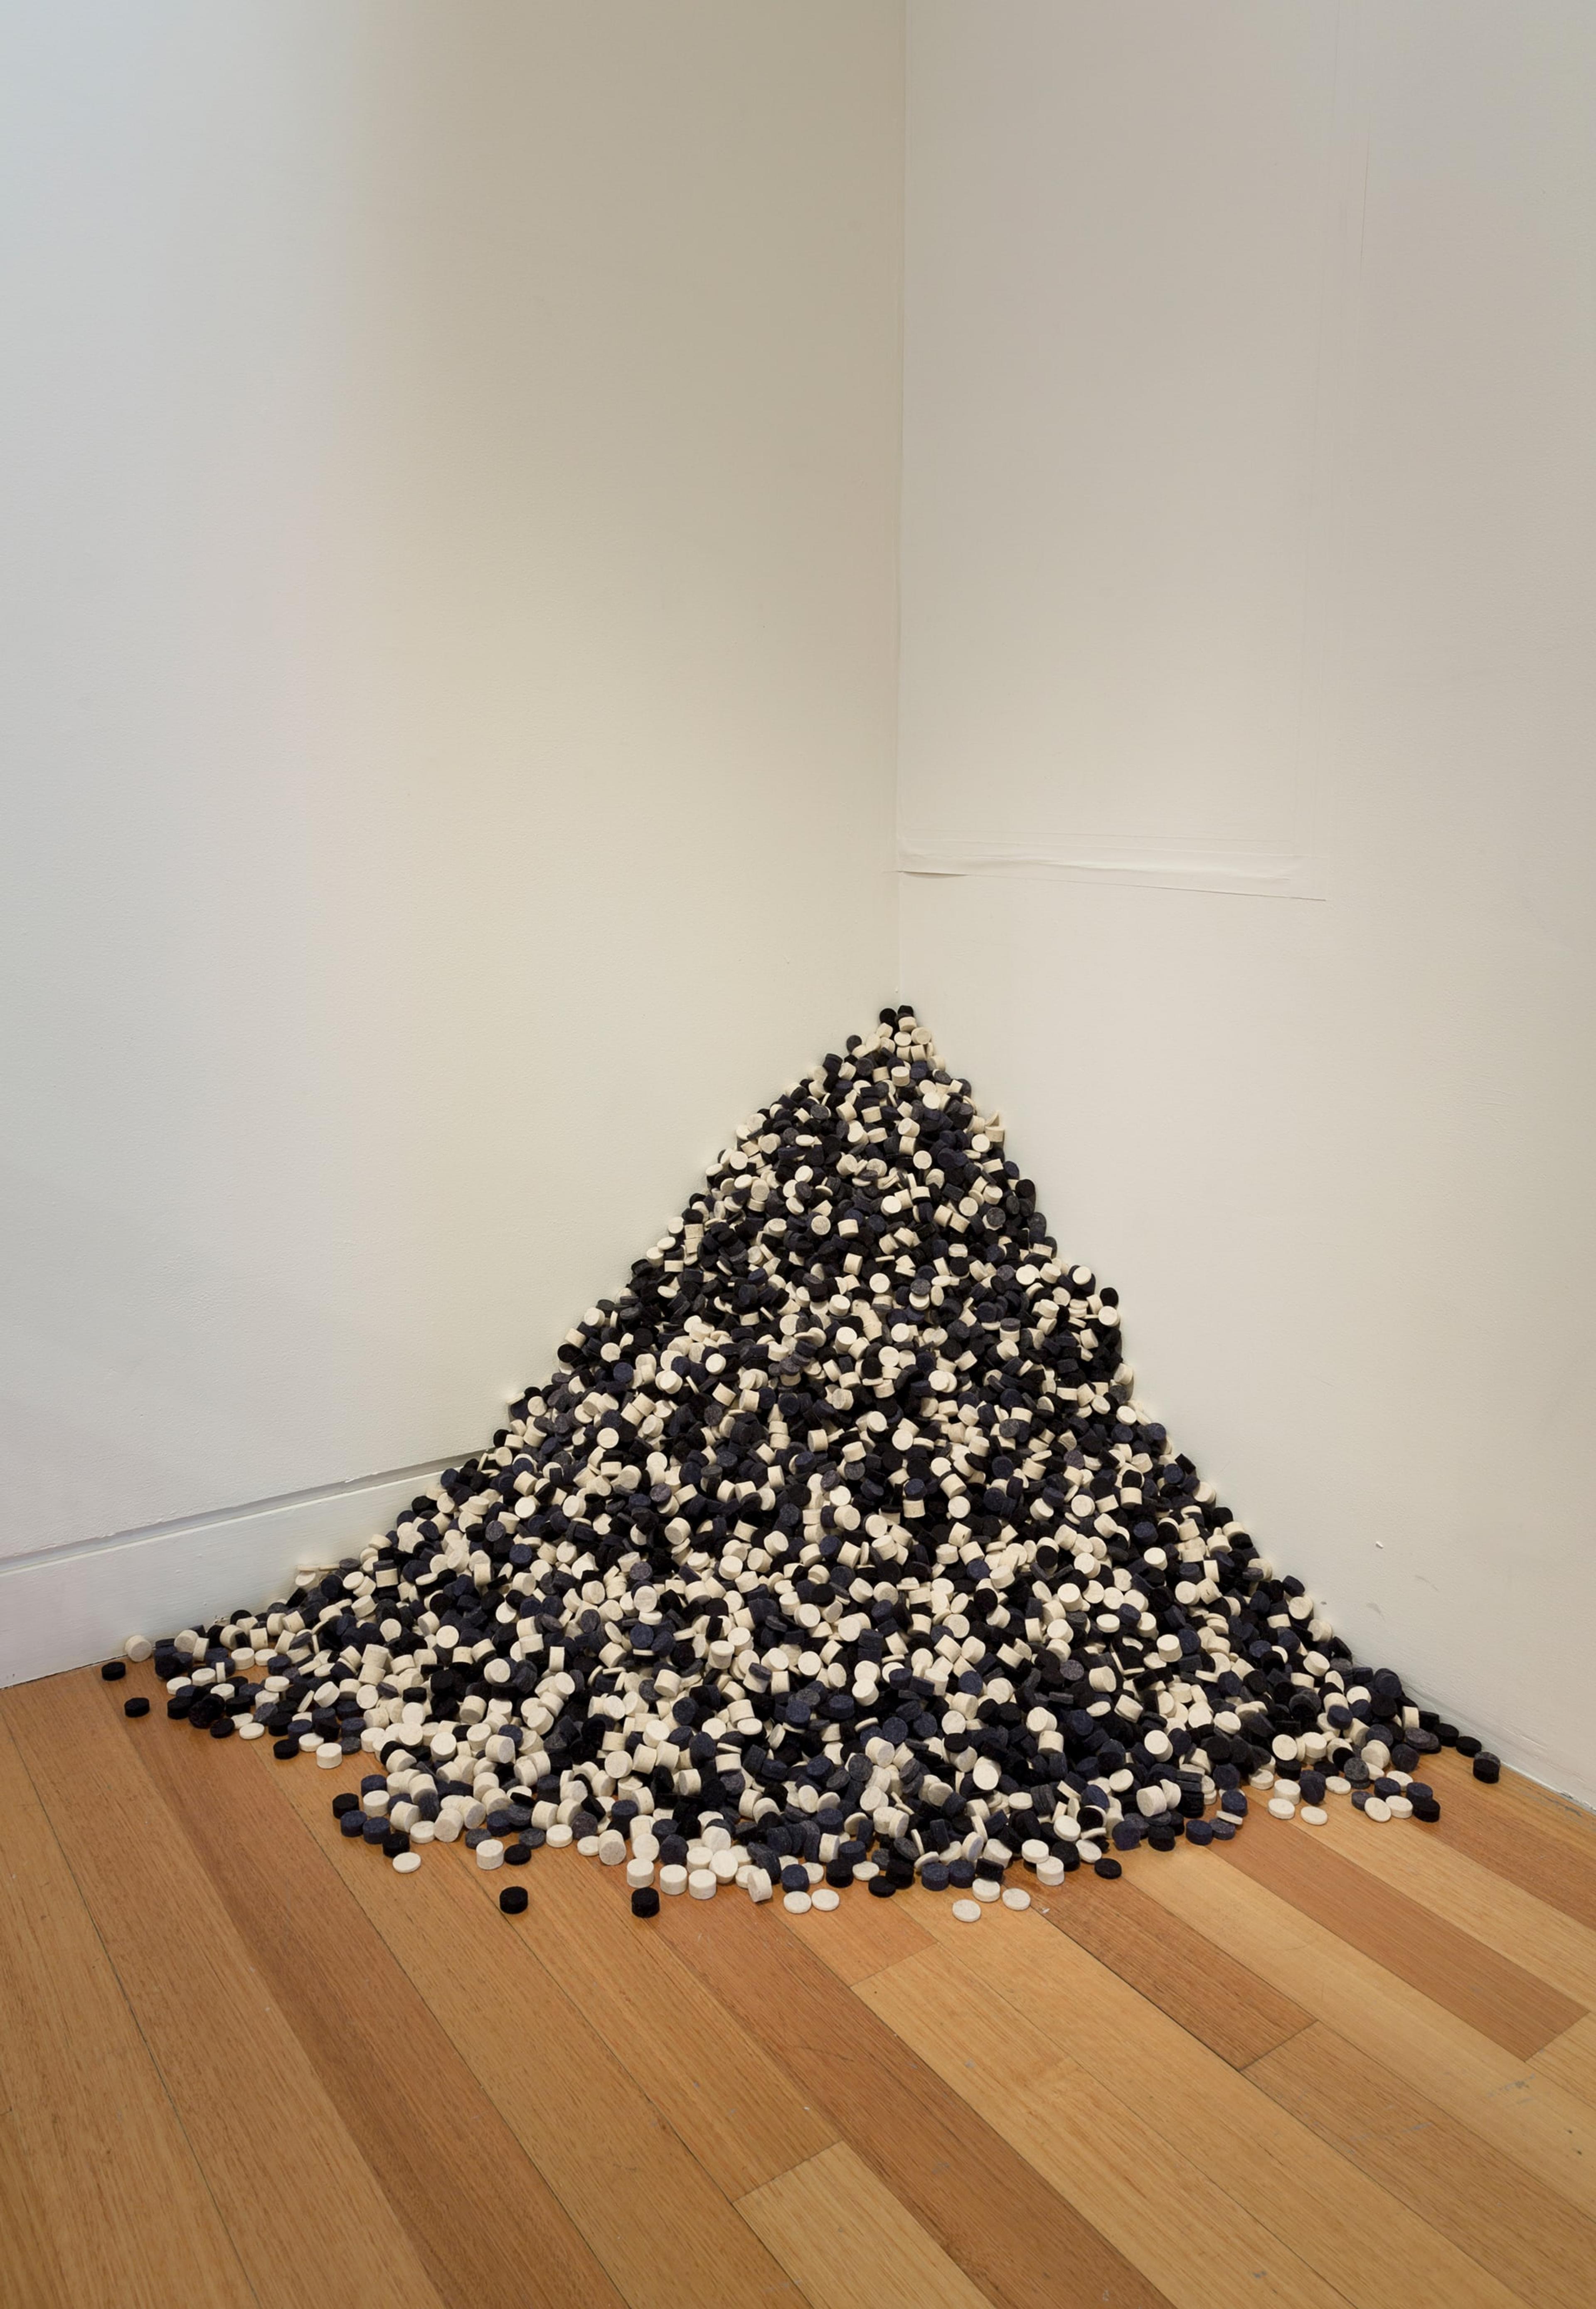 Peter Robinson, Cuts and Junctures, 2013, cut wool felt, installation dimensions variable, at the Adam Art Gallery. Courtesy the artist and Peter McLeavey Gallery, Wellington. Photo: Shaun Waugh.